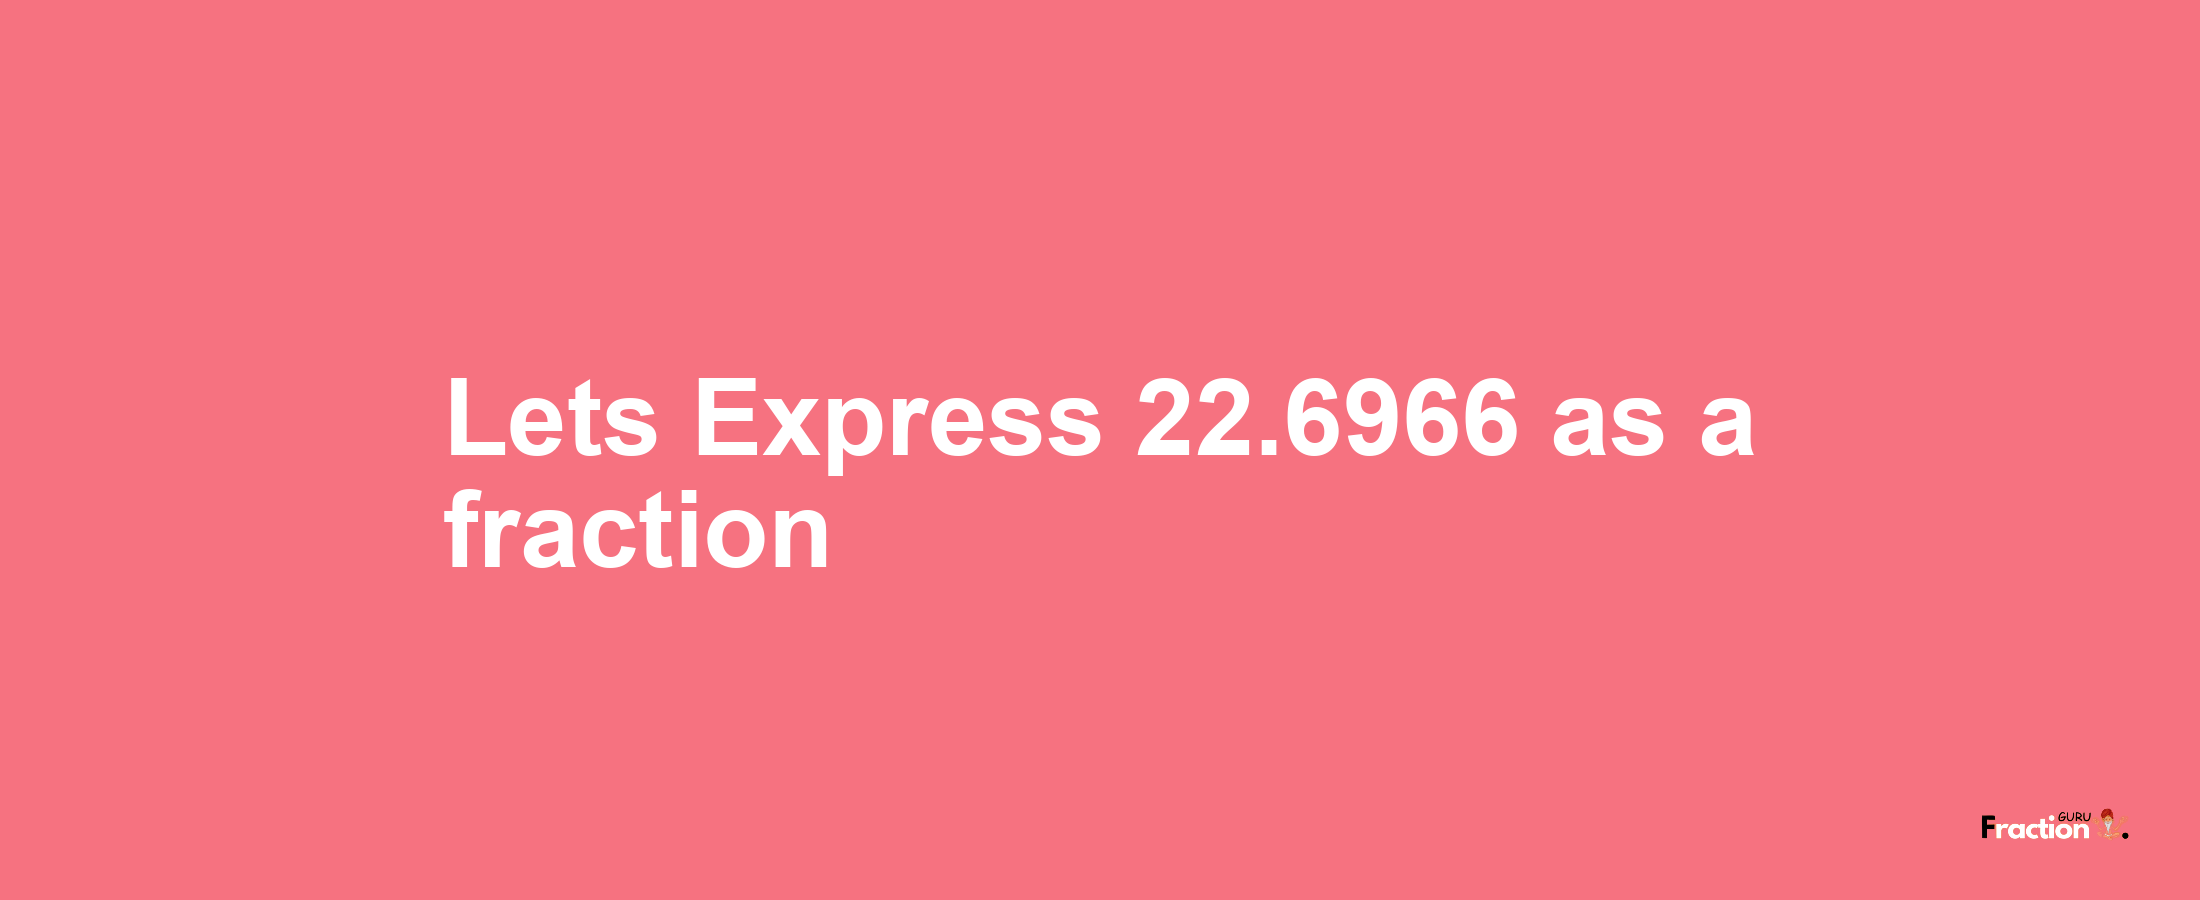 Lets Express 22.6966 as afraction